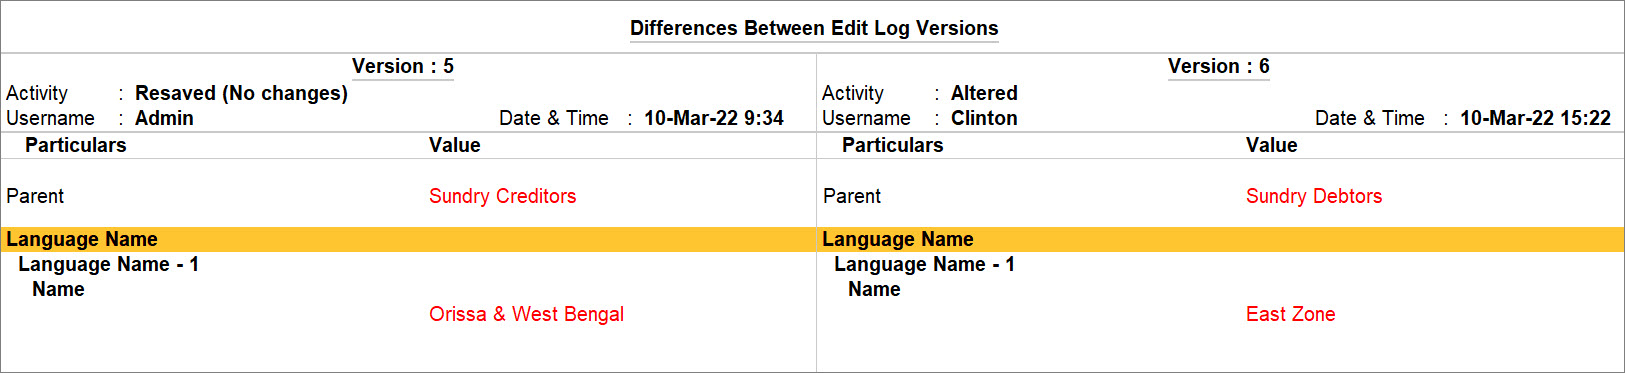 Differences Between Edit Log Versions After Configuring in TallyPrime